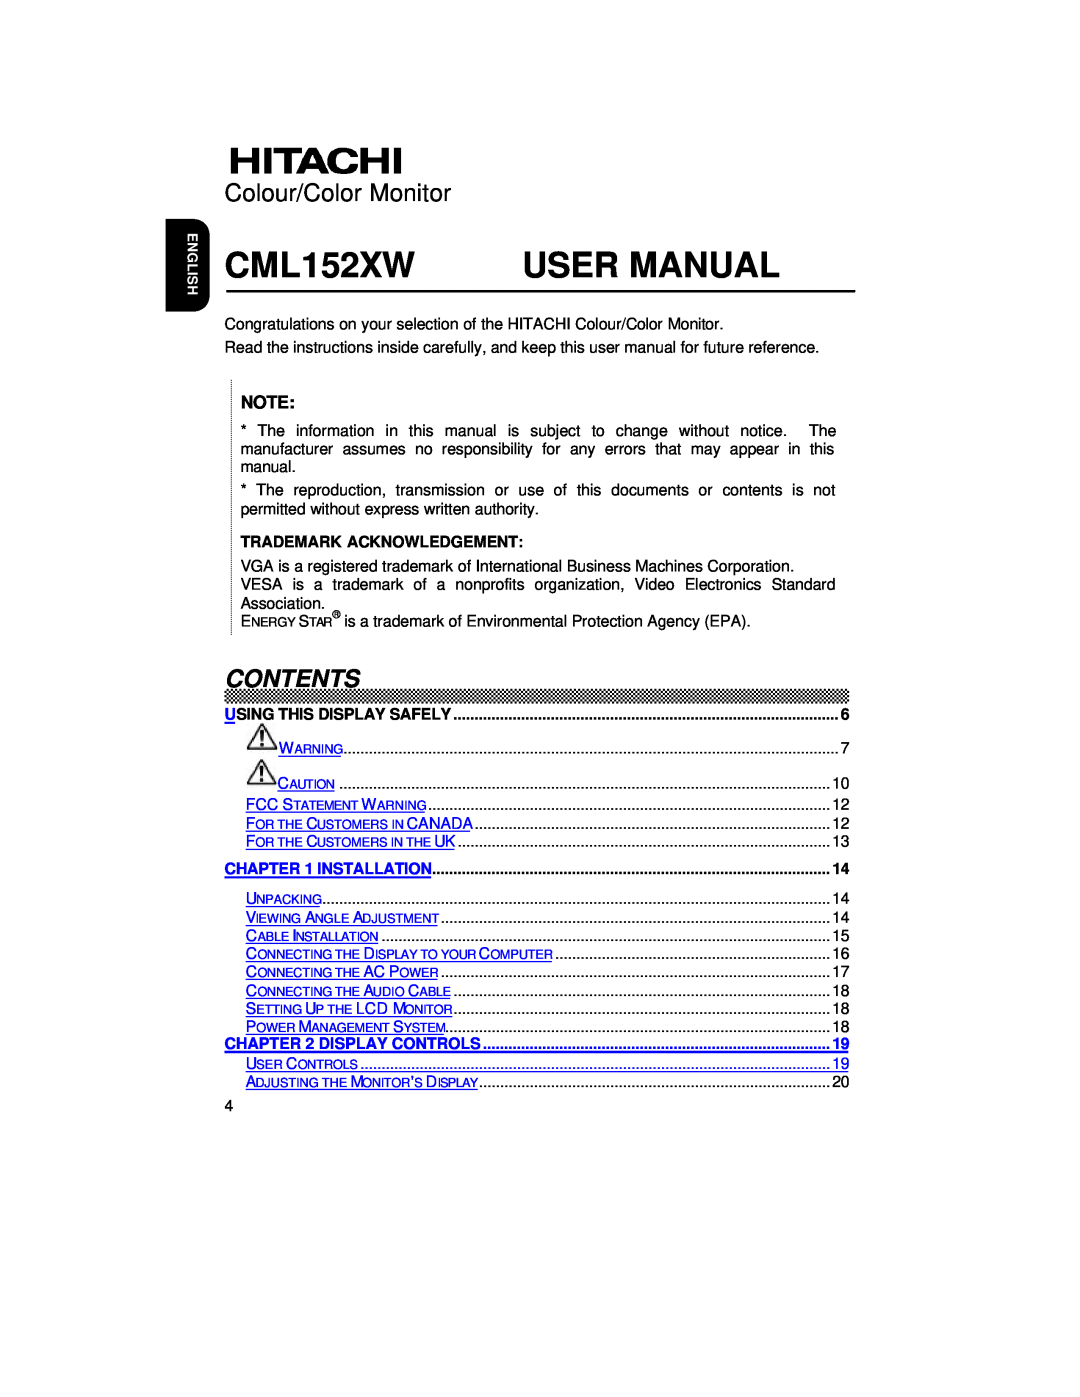 Hitachi CML152XW manual Trademark Acknowledgement, Using This Display Safely, Installation, Display Controls, Contents 